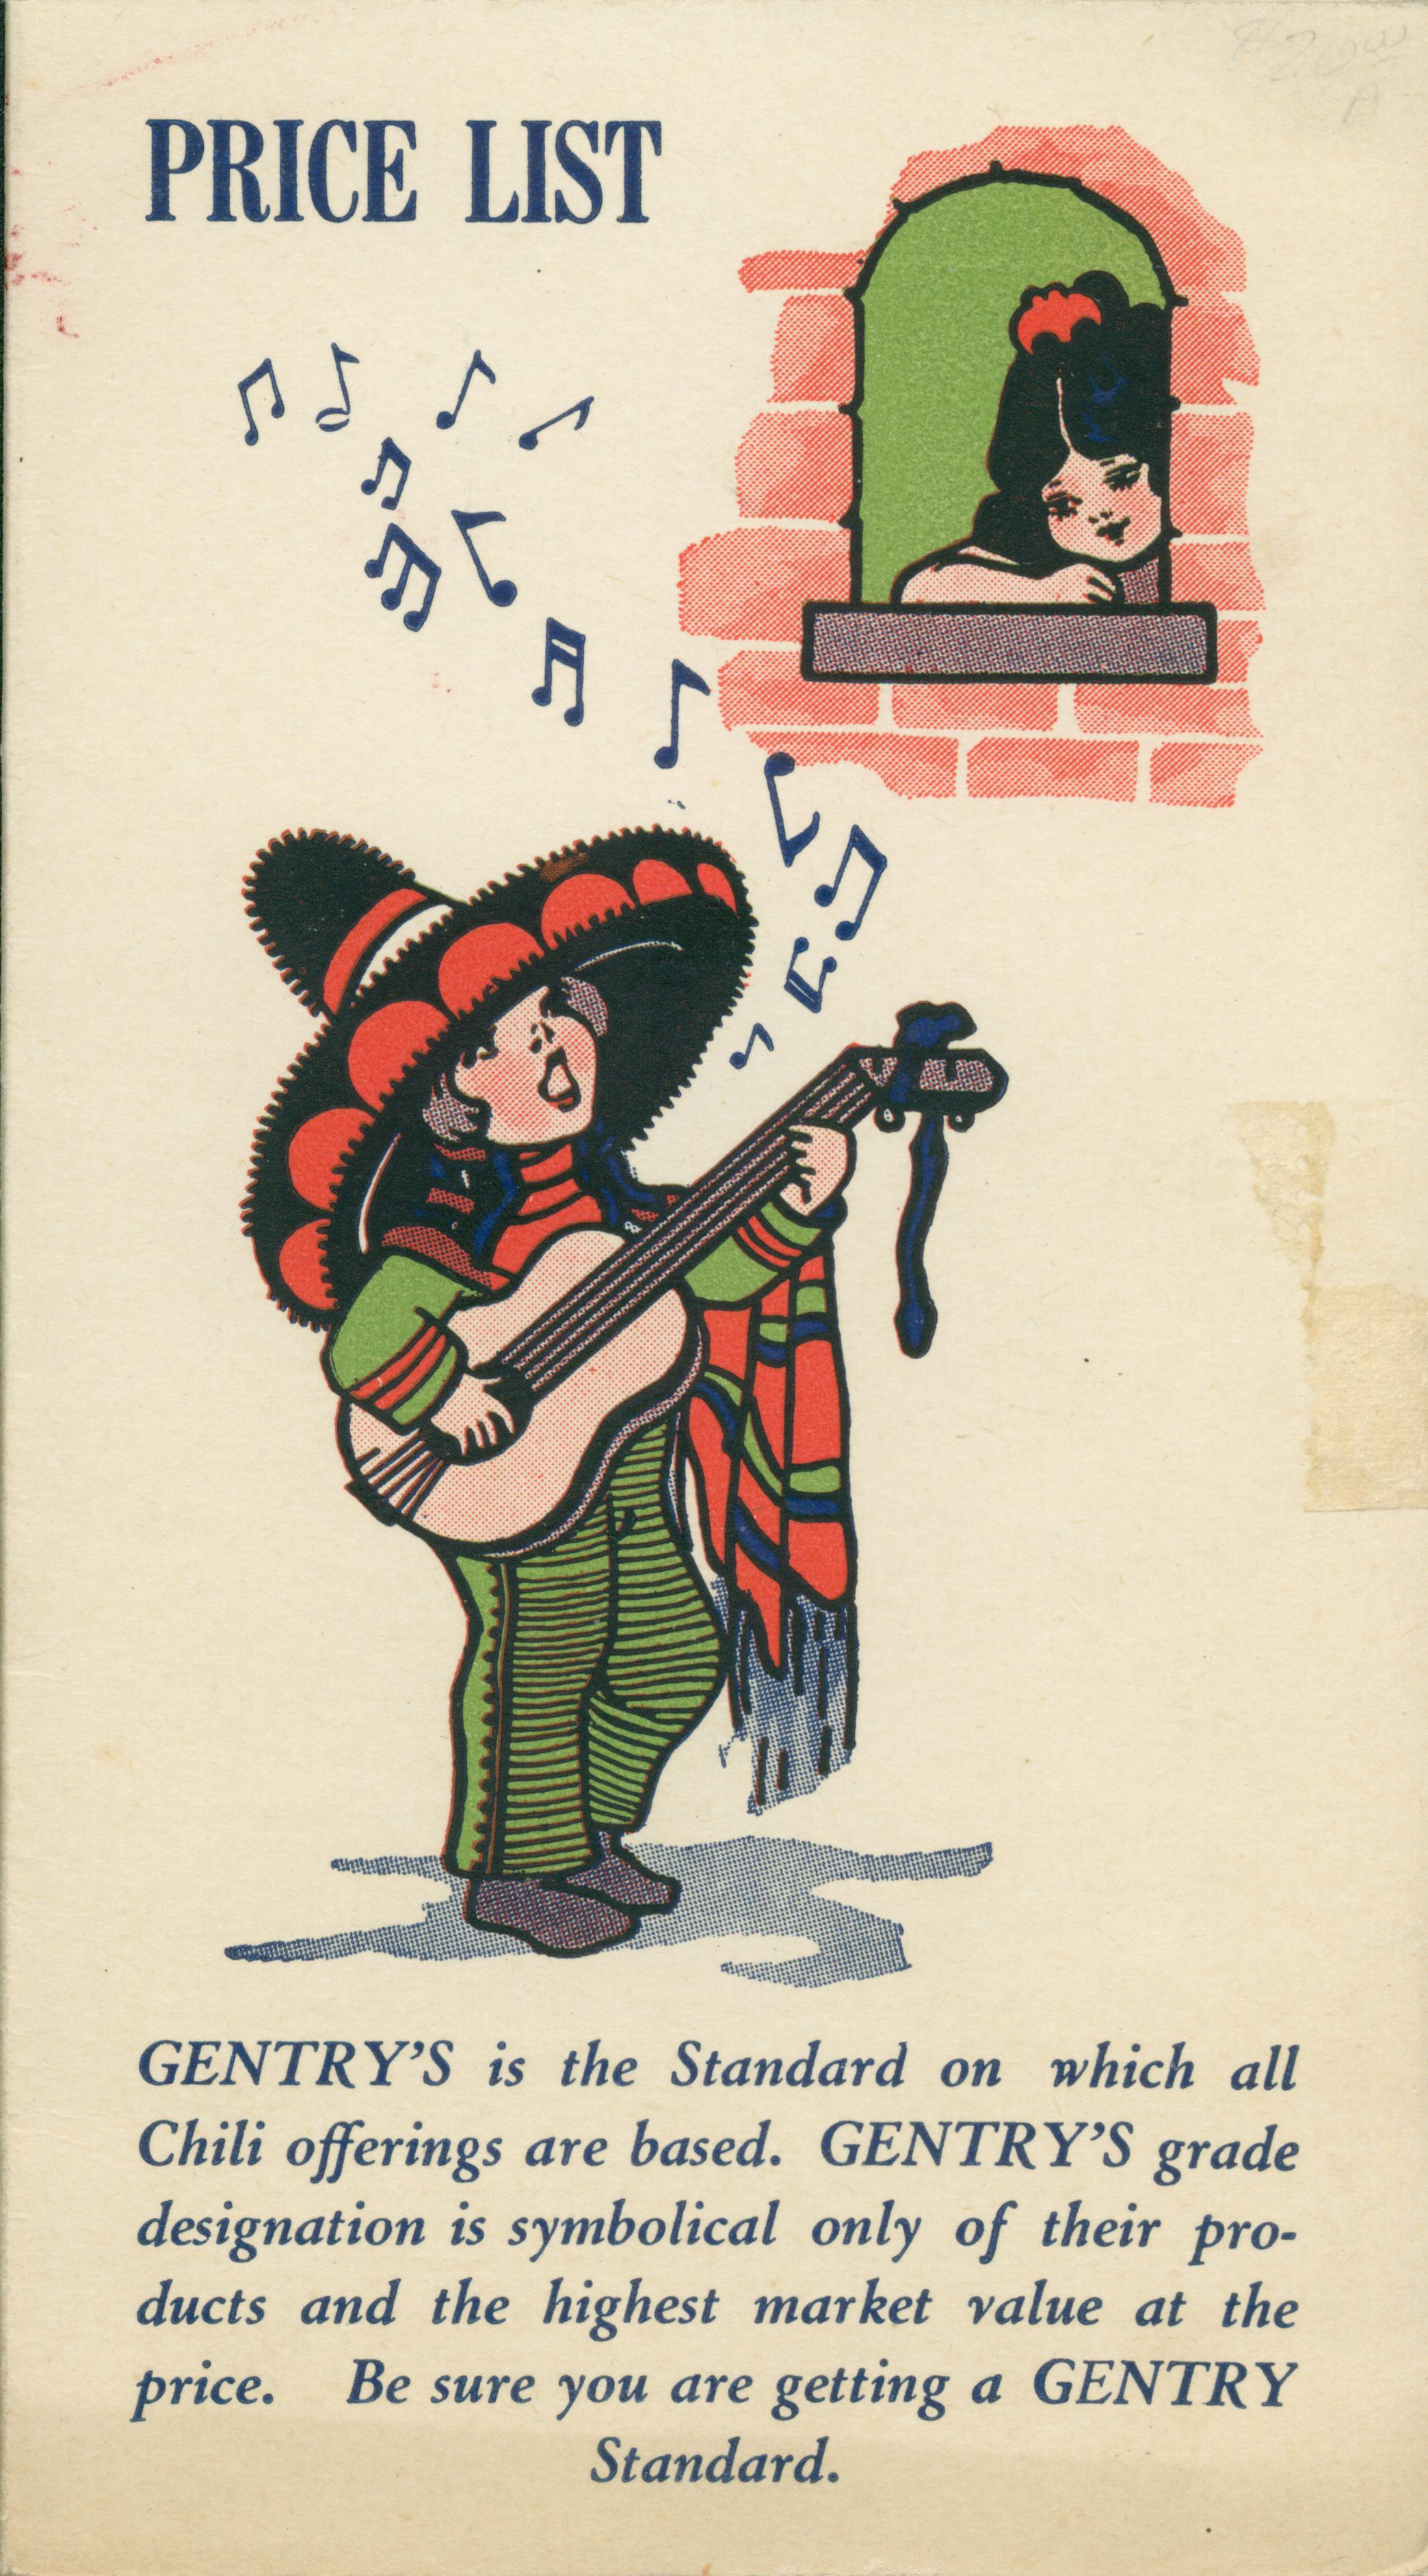 This advertisement shows a boy in a sombrero serenading a girl at a window with his guitar.